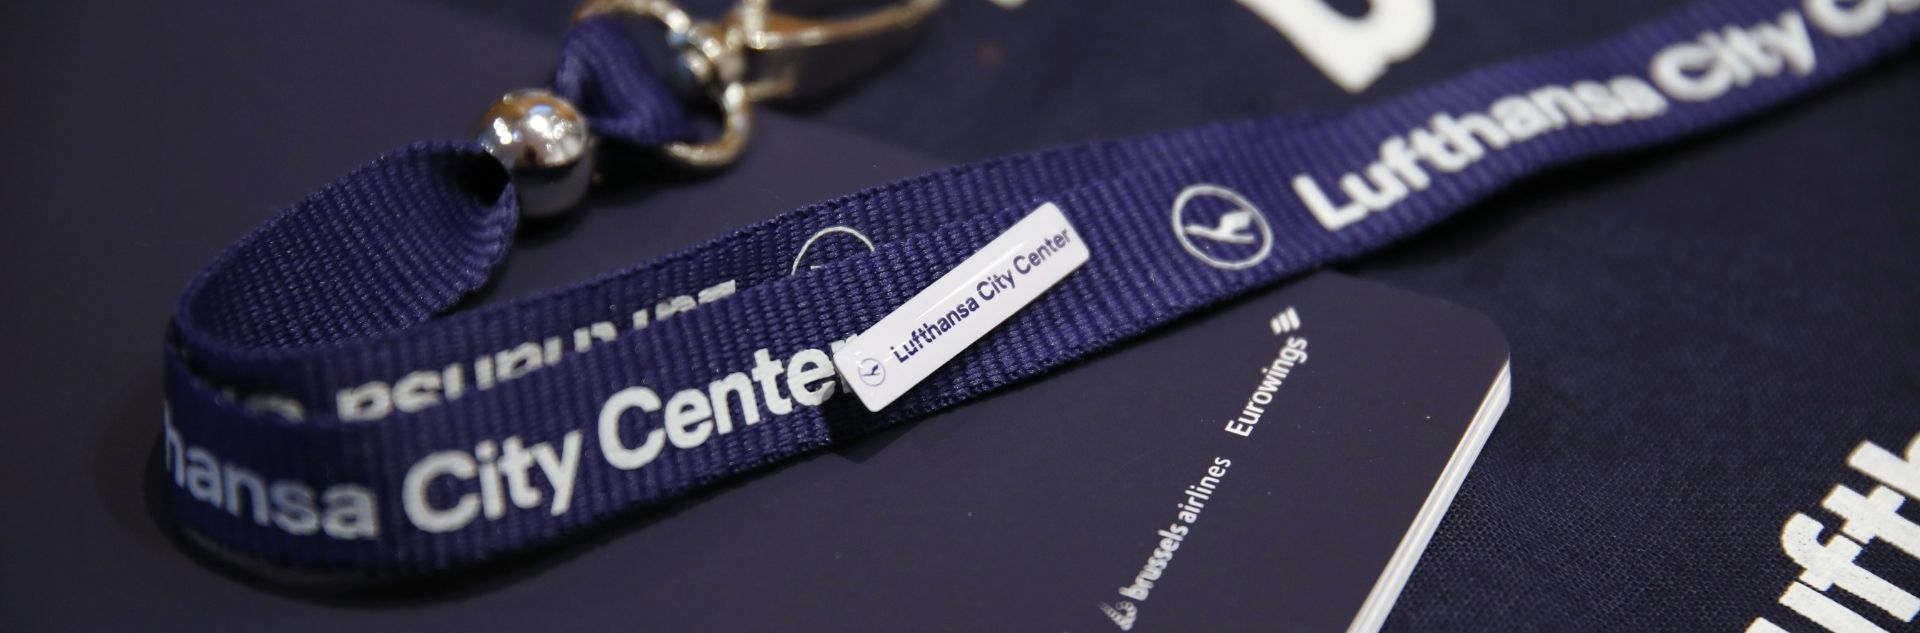 lanyard and pin with lcc branding